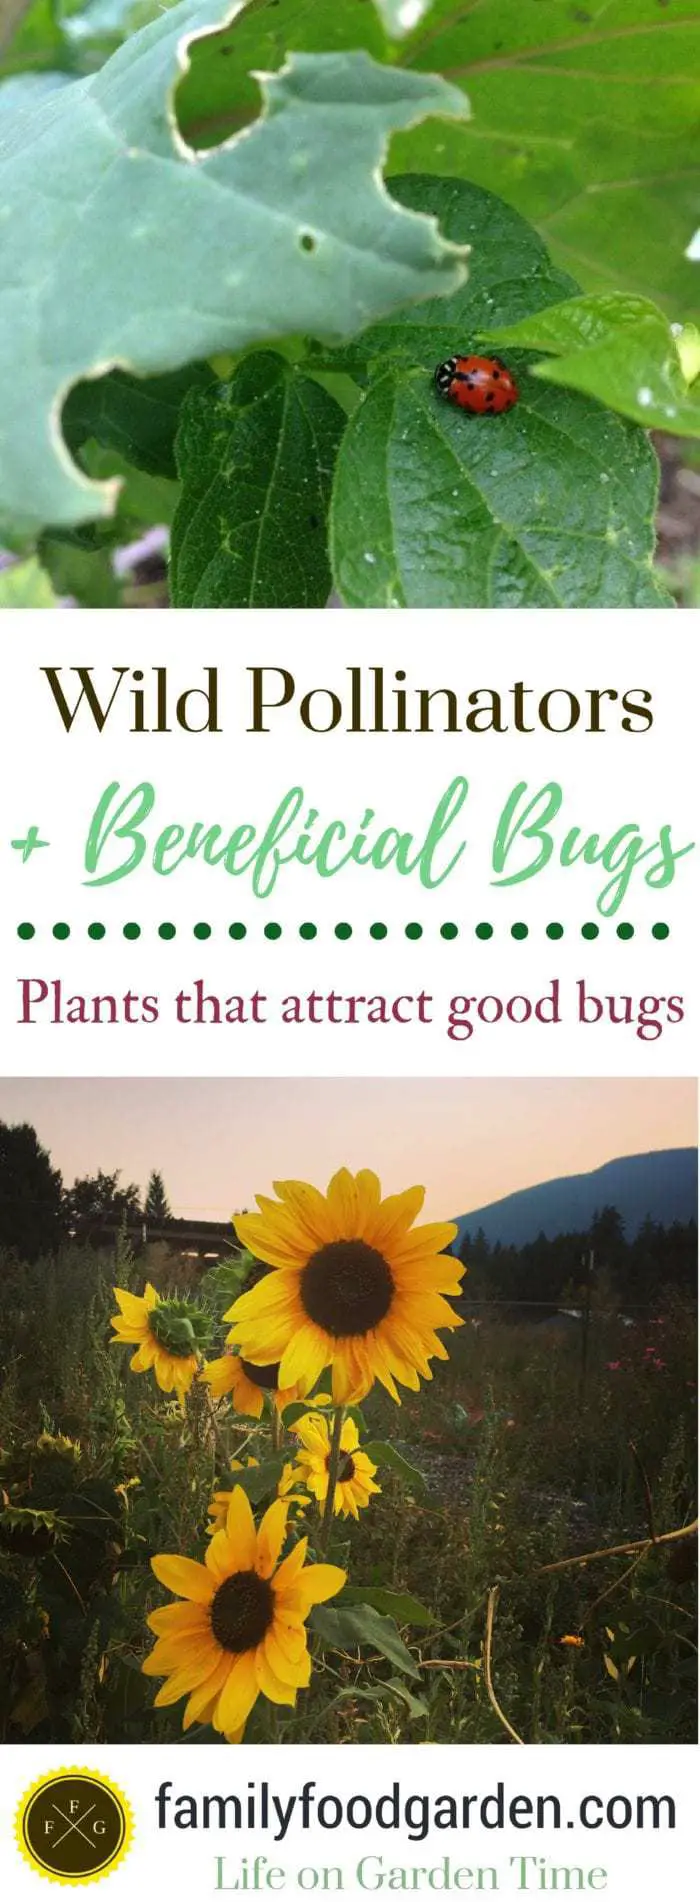 Wild Pollinators + Beneficial Bugs: Plants That Attract Good Bugs